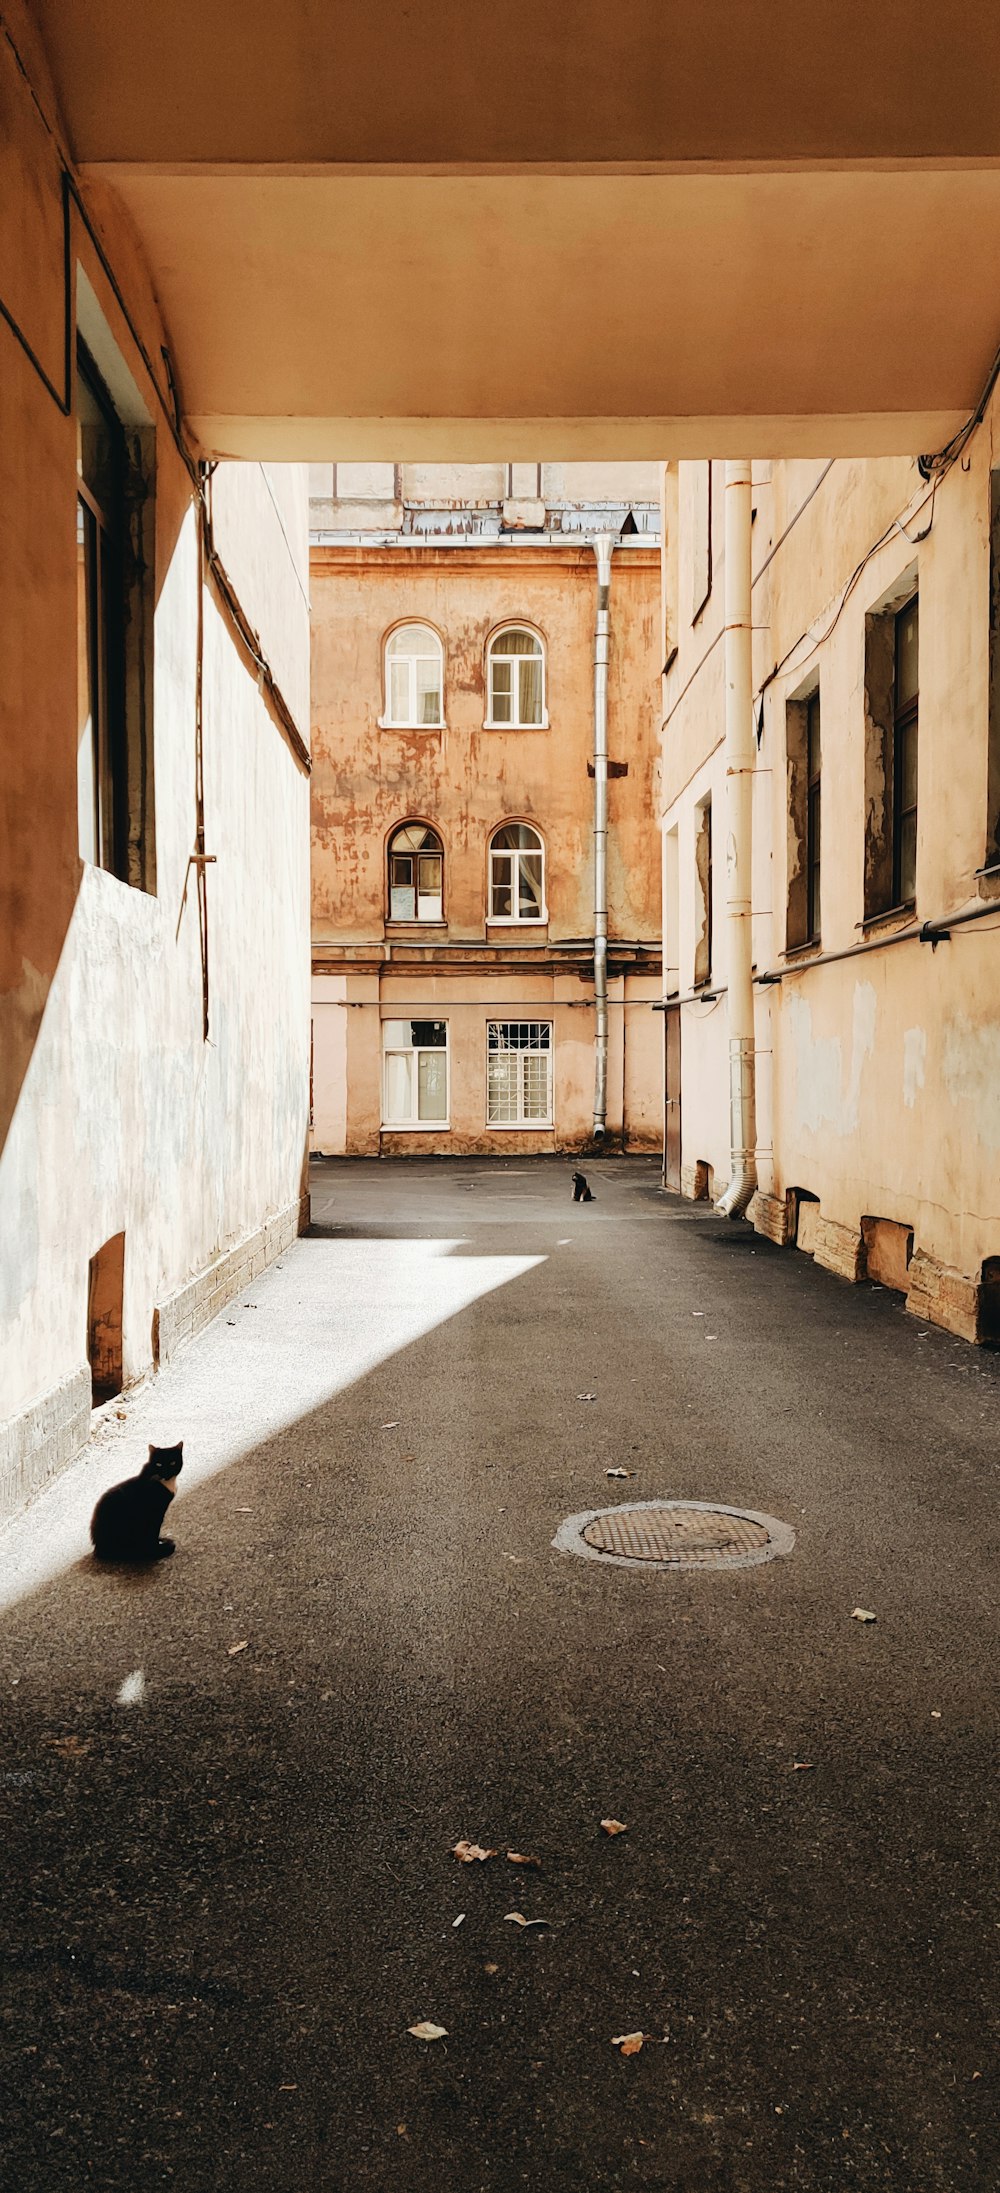 a black cat sitting on the floor of a building